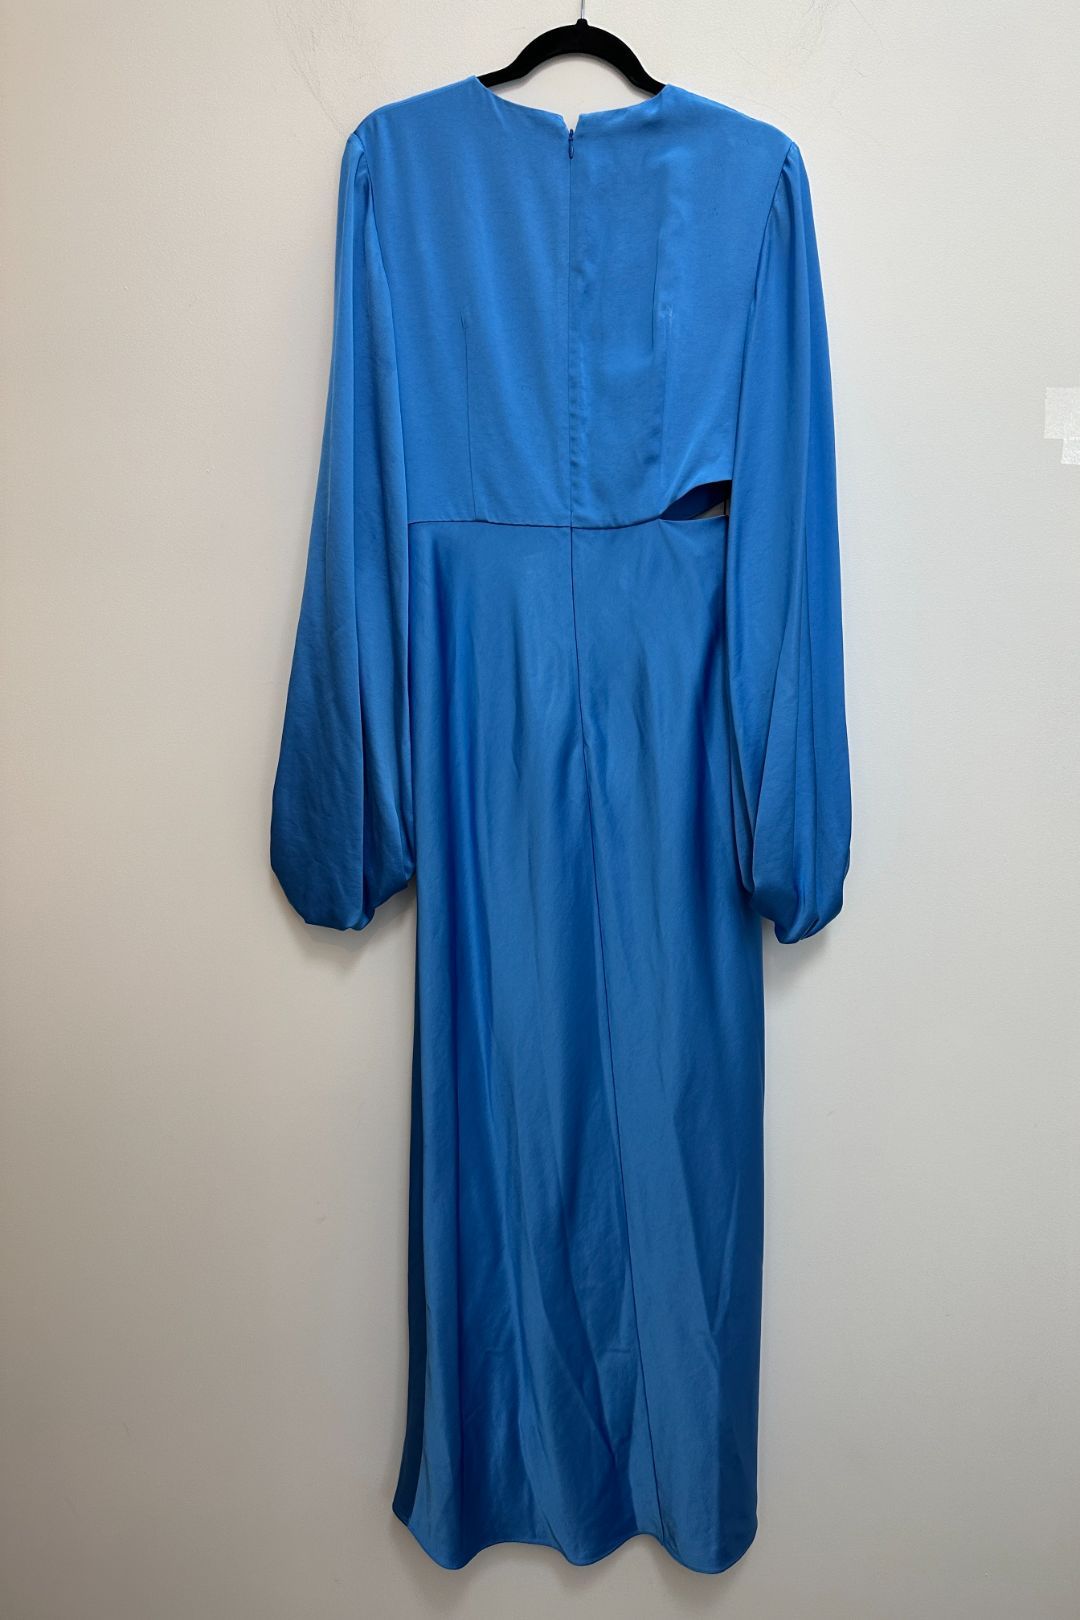 Significant Other Lara Long Sleeve Dress in Blue